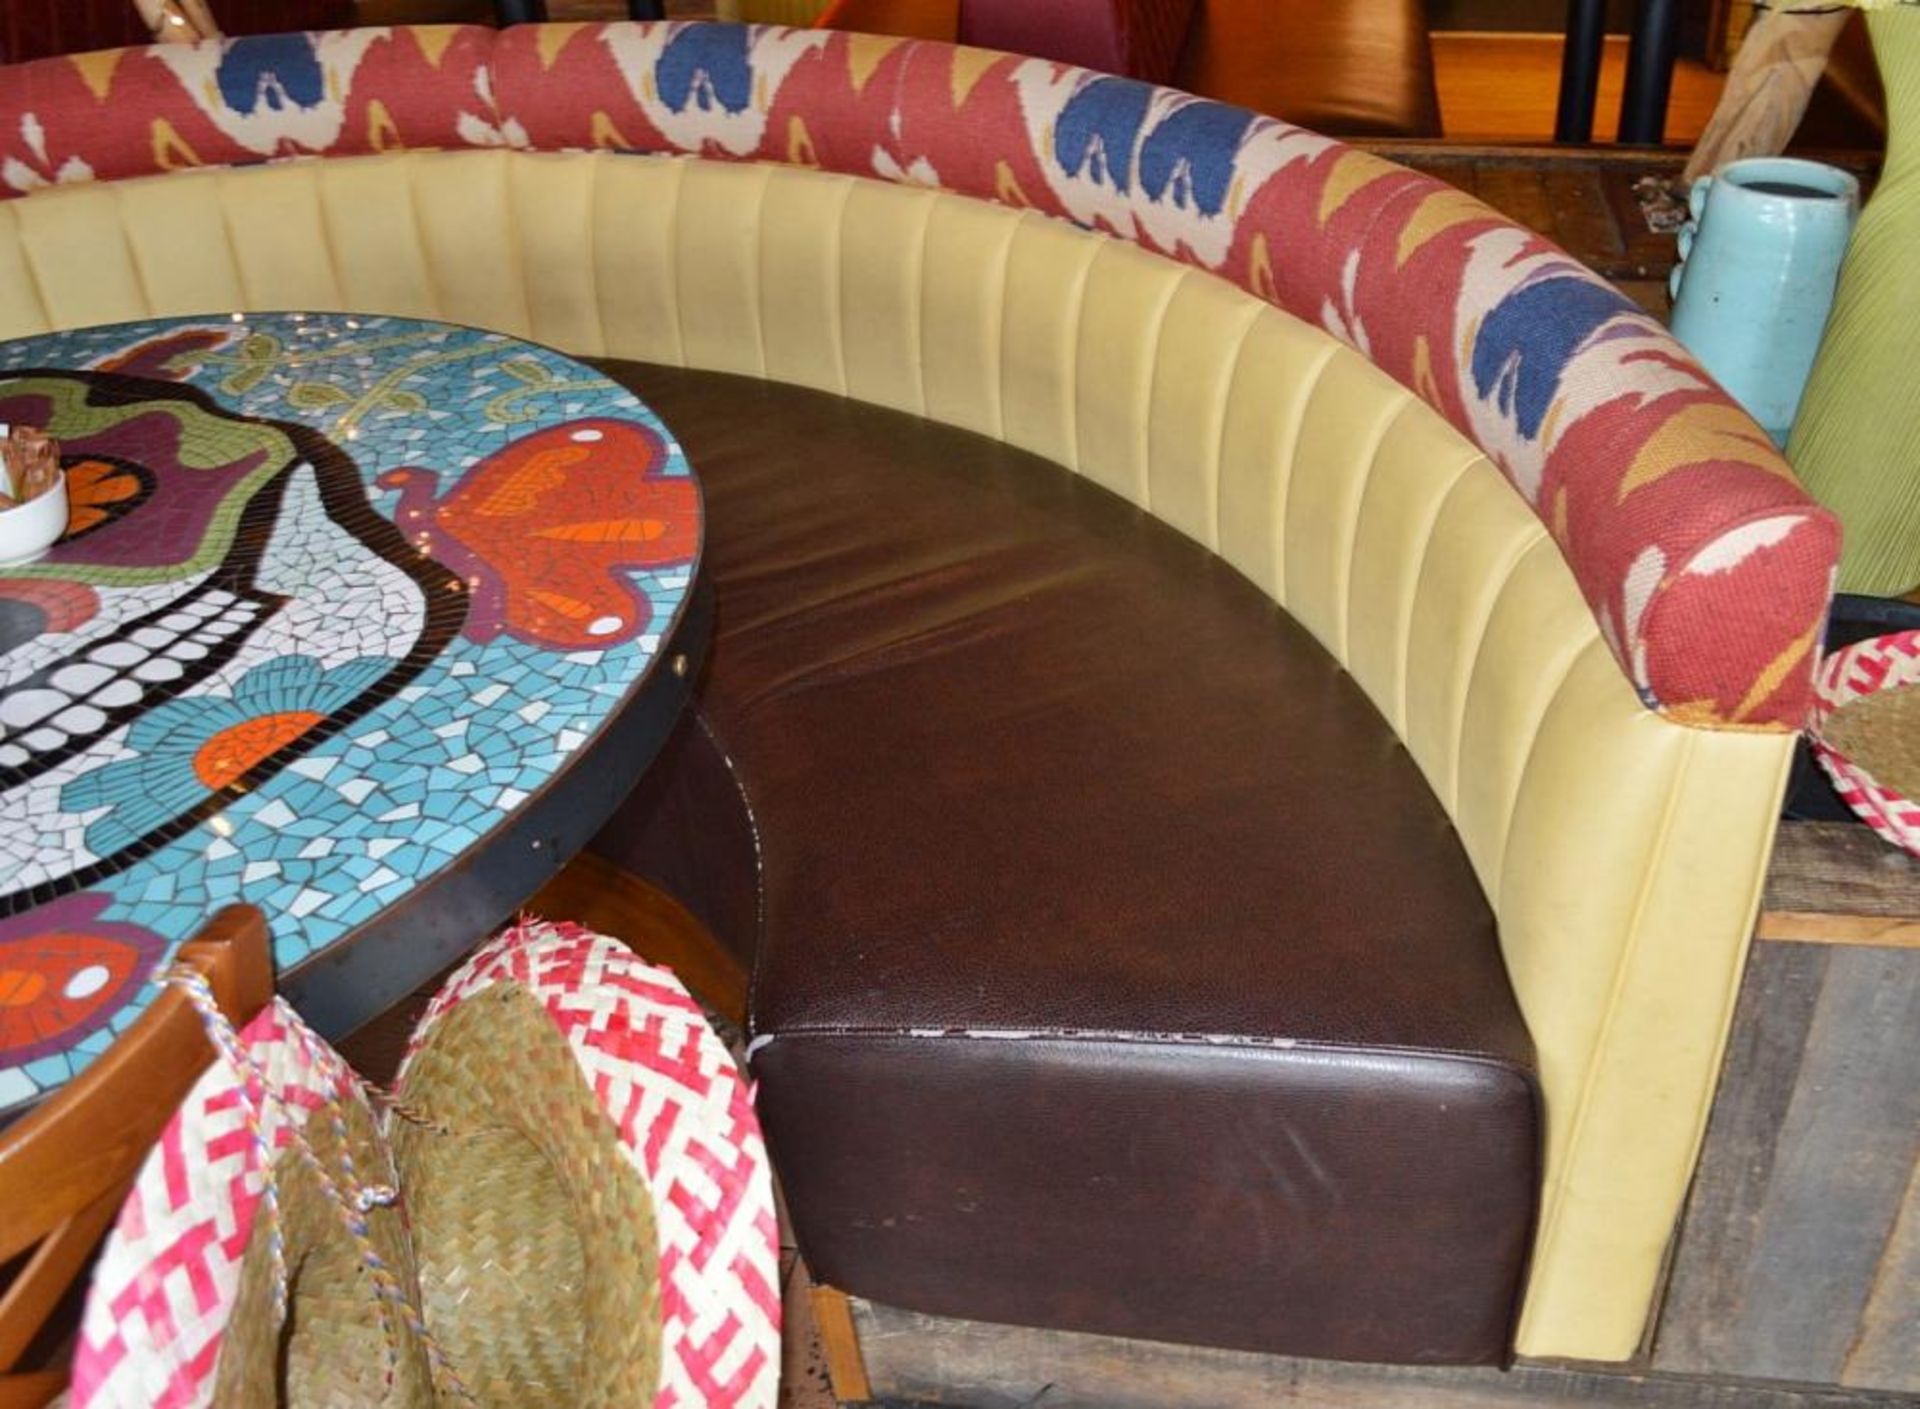 2 x Half Circle Seating Booths / Banquet Seating - Faux Leather Brown Seating With Yellow and Brown - Image 11 of 15